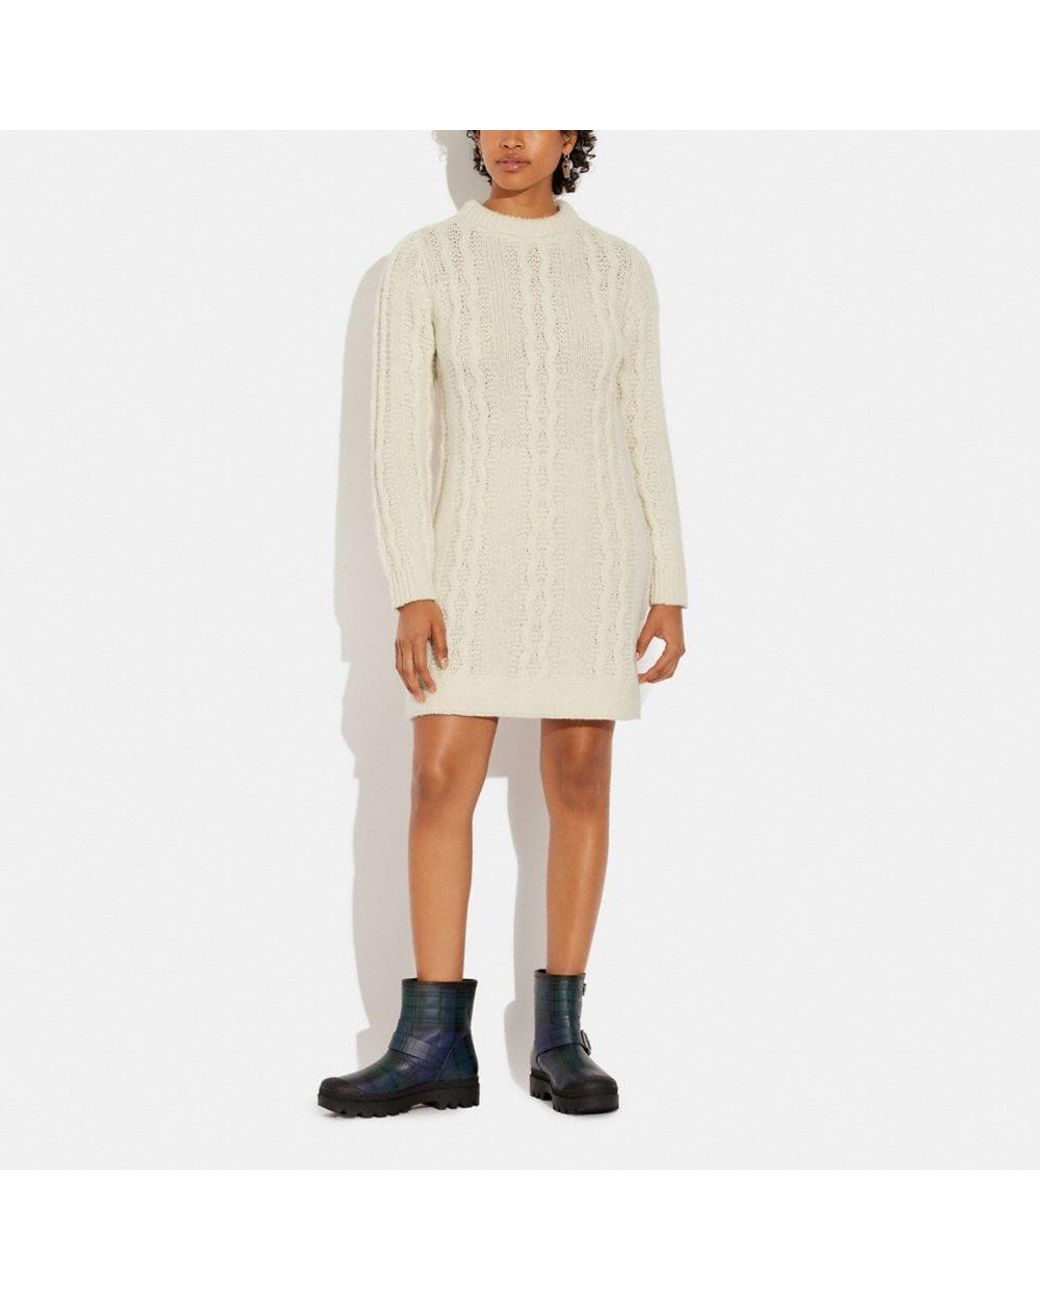 COACH Cable Knit Dress in Natural